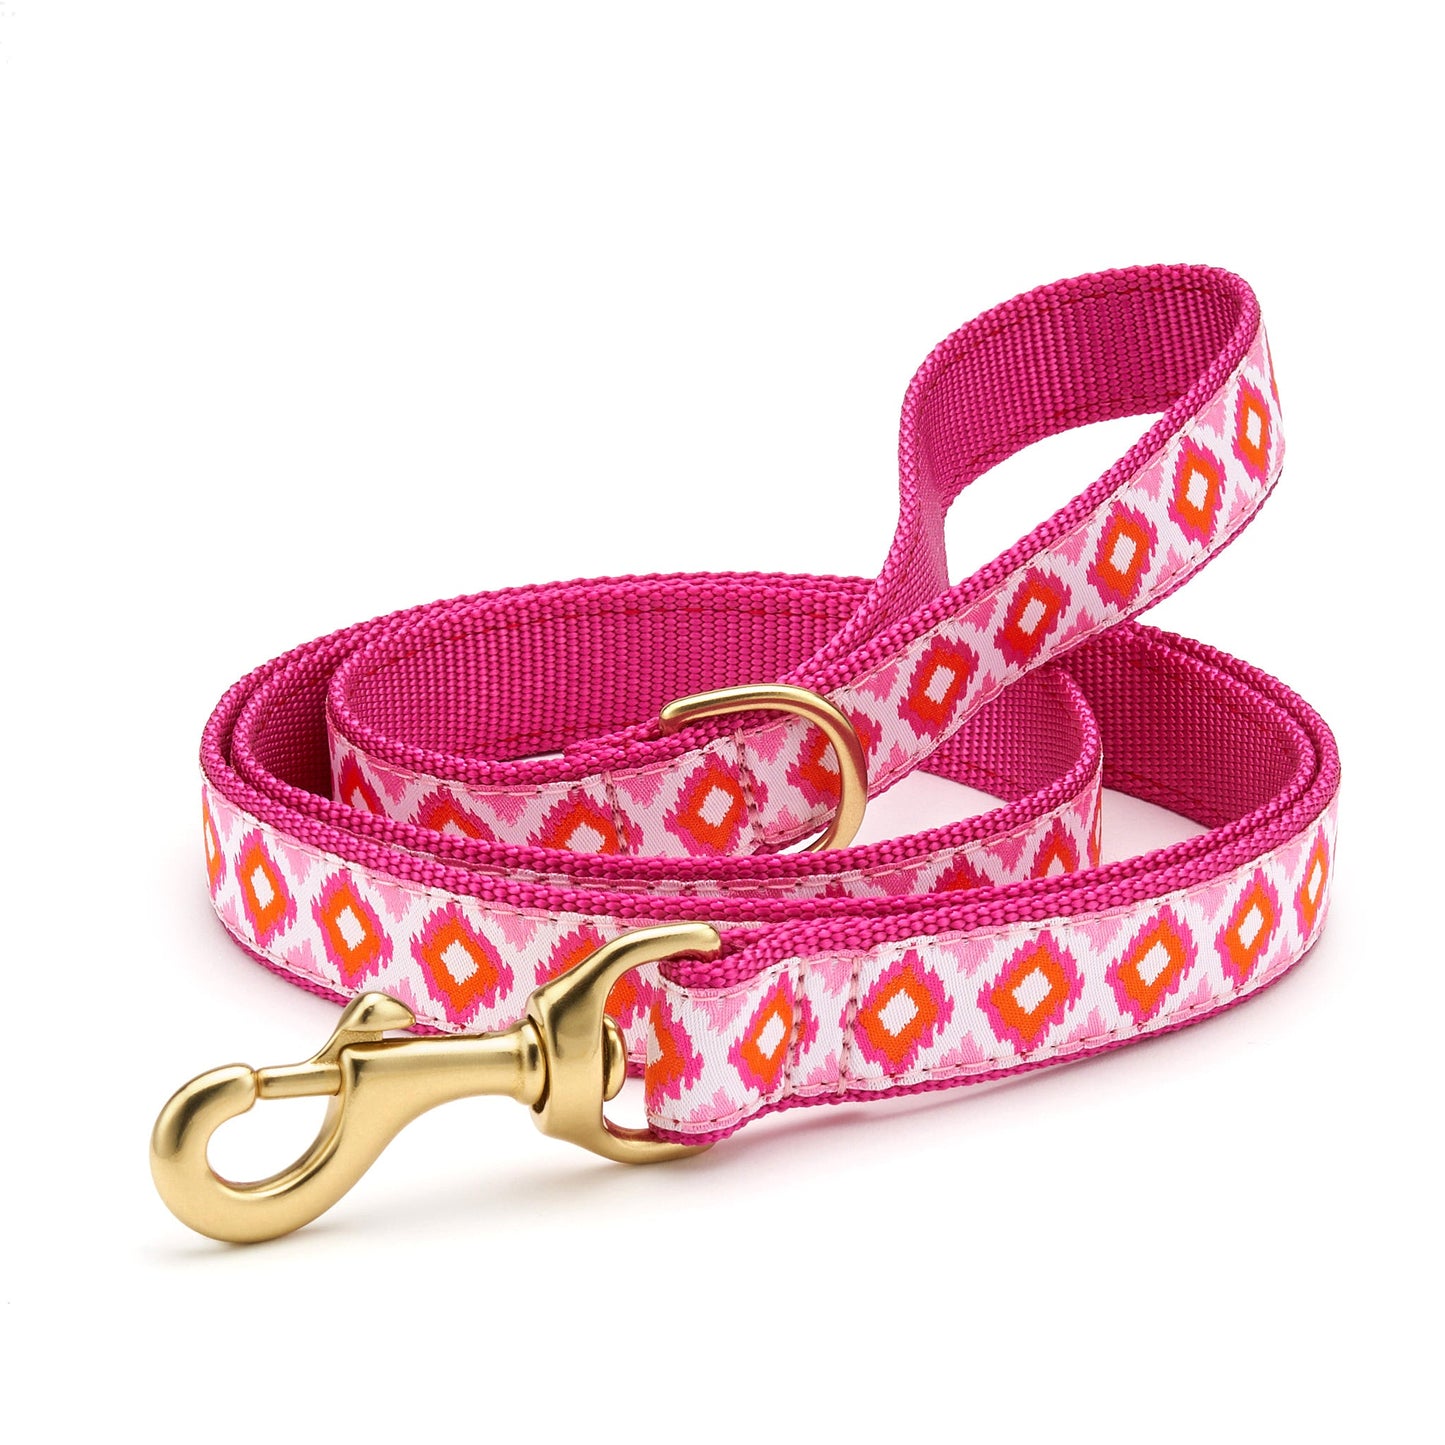 Pink Crush Dog Lead by Up Country